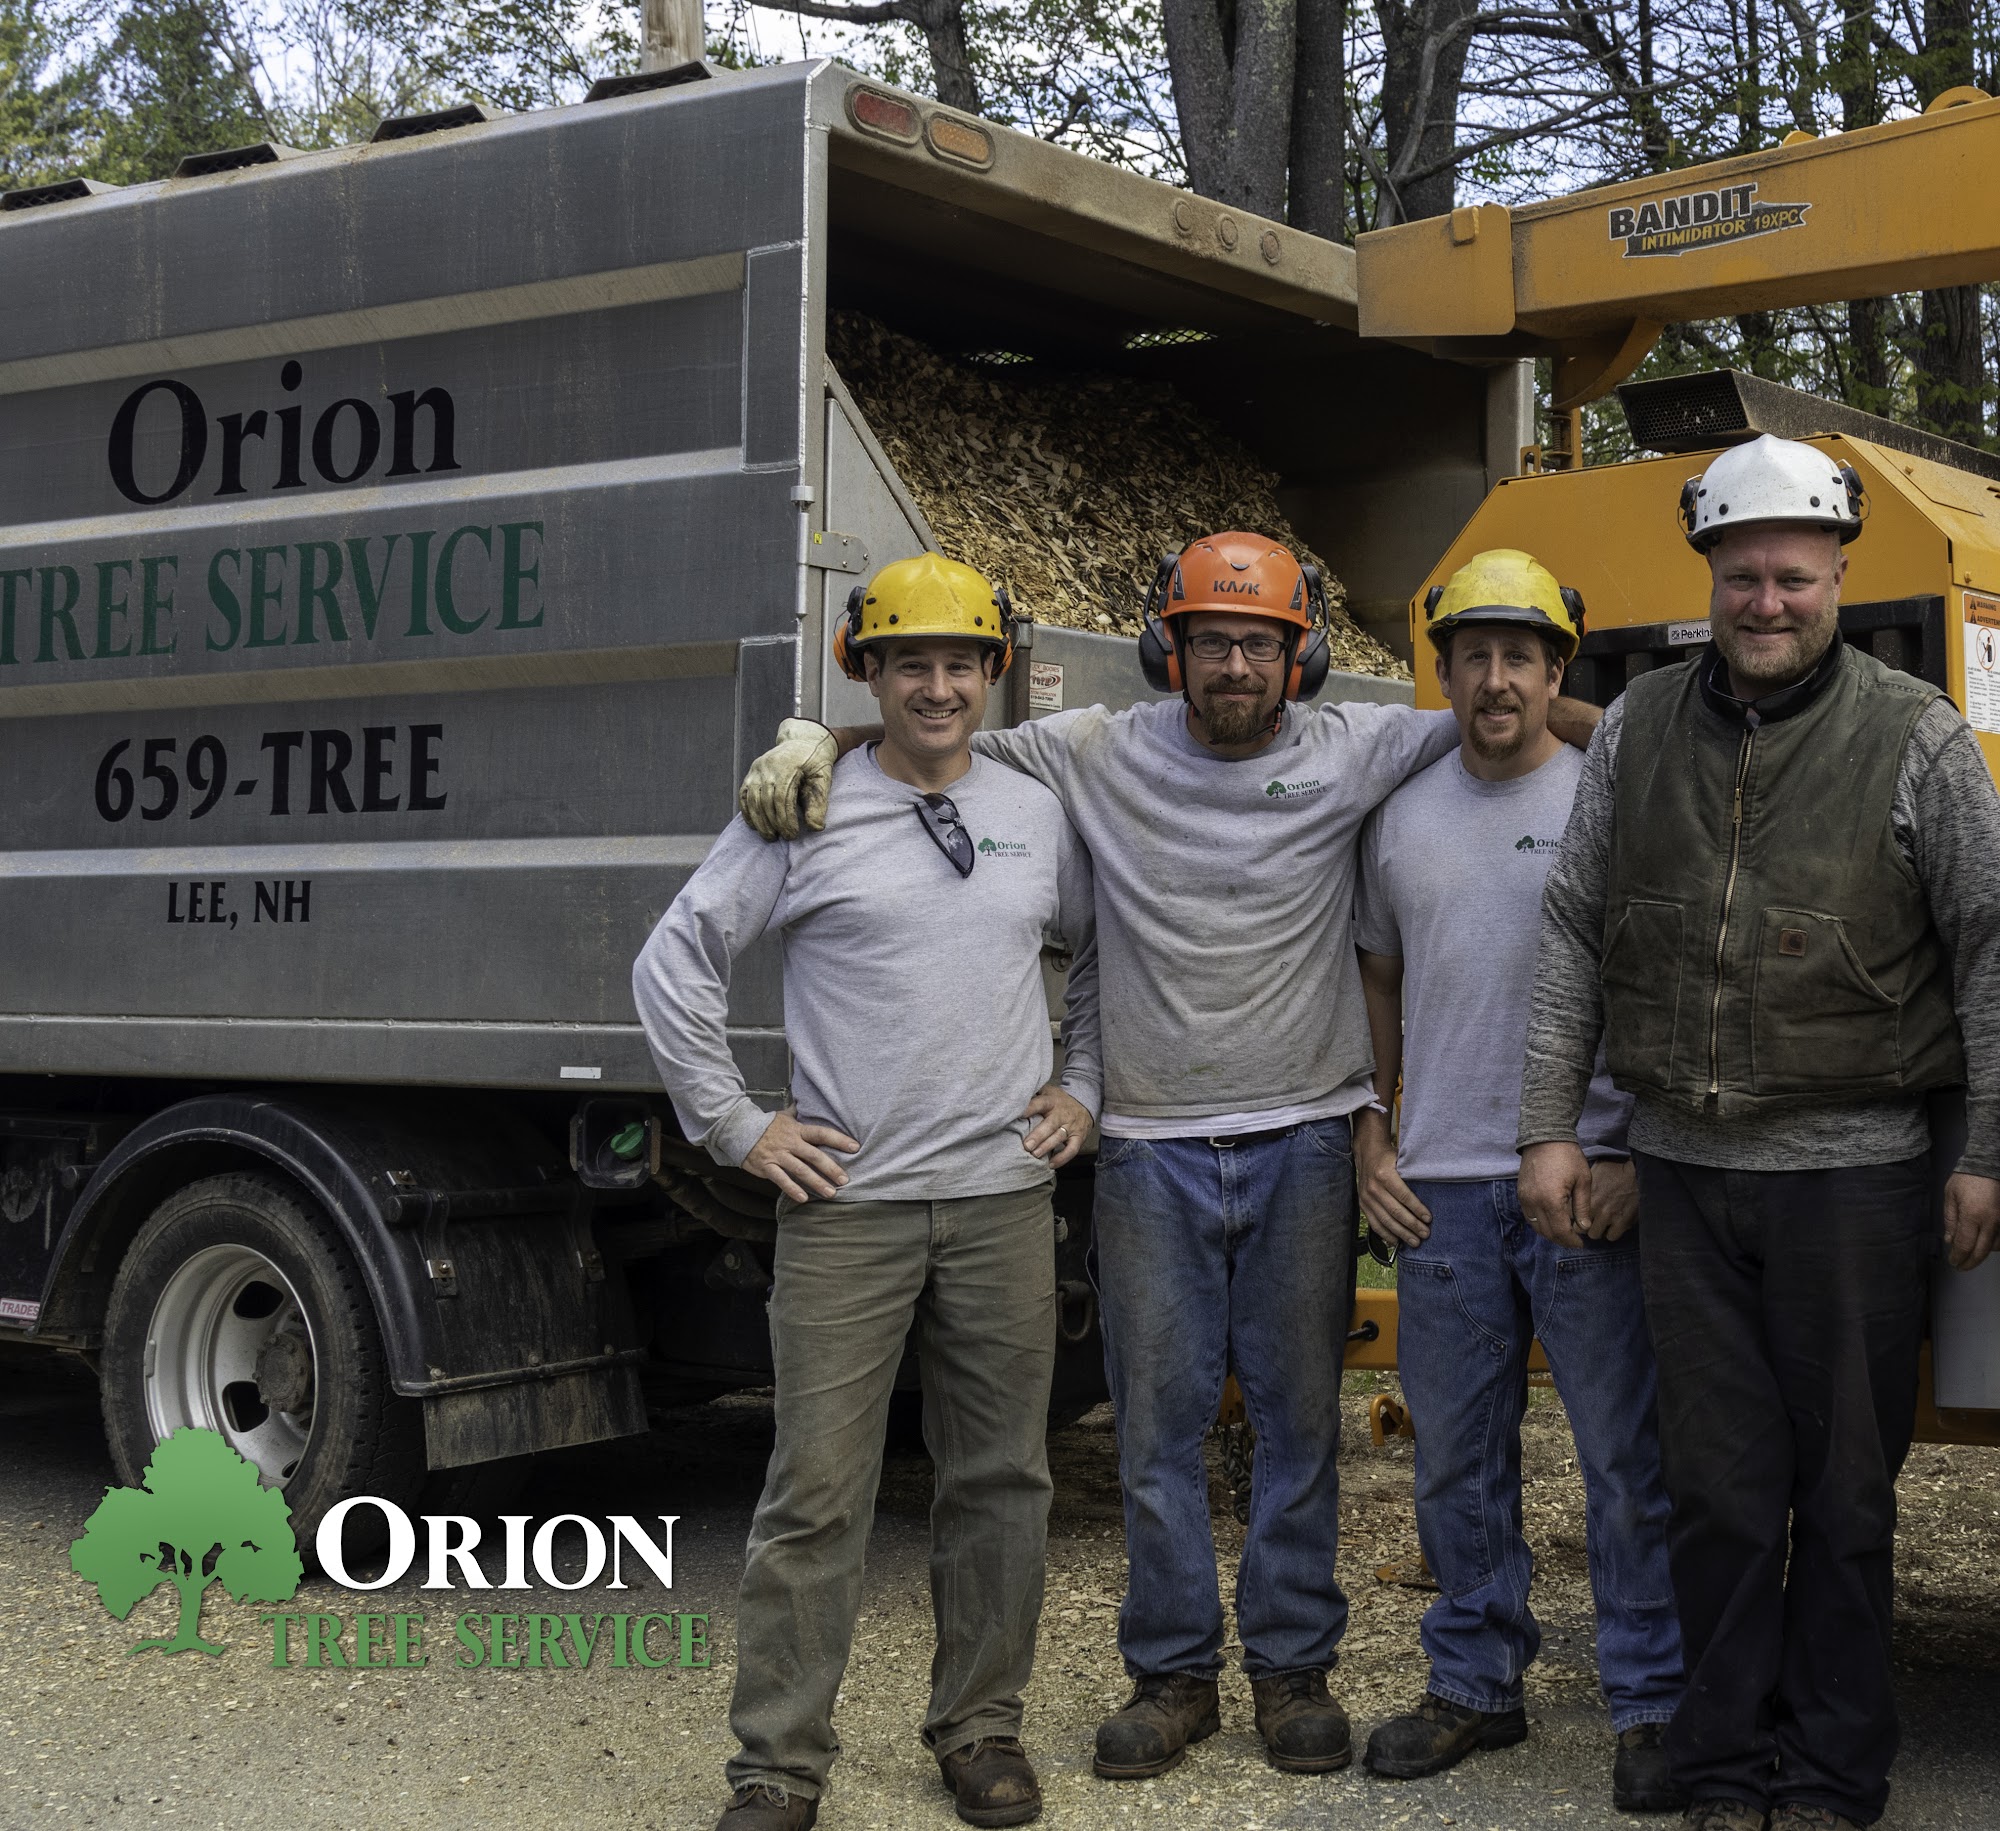 Orion Tree Services 44 Mast Rd, Lee New Hampshire 03861